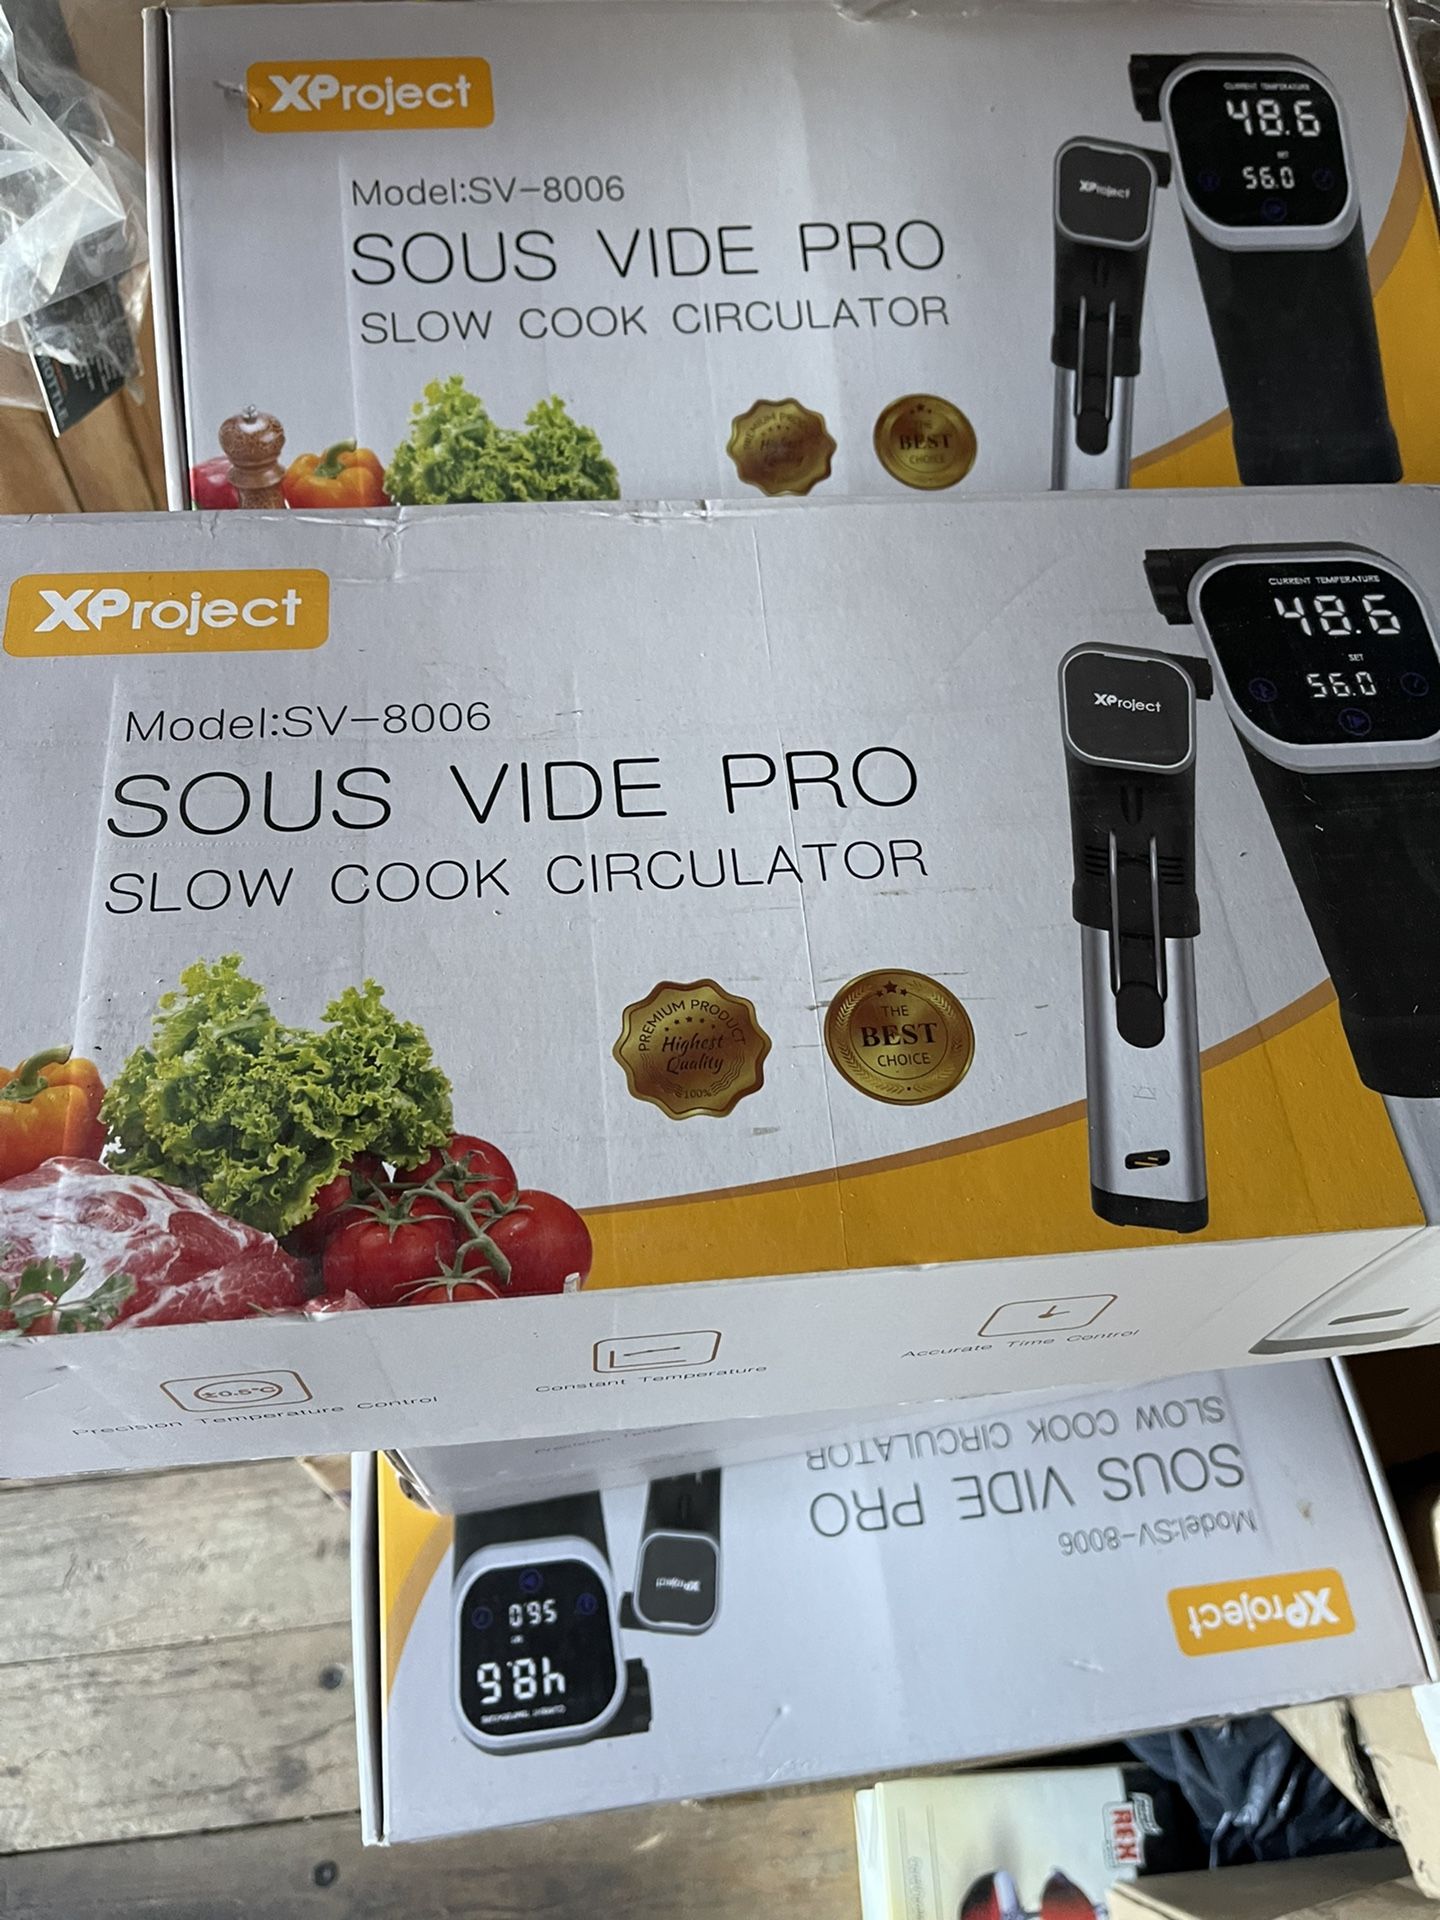 Brand New In Boxes Xproject Sous Vide Pro Model Sv-8006 $40.00 